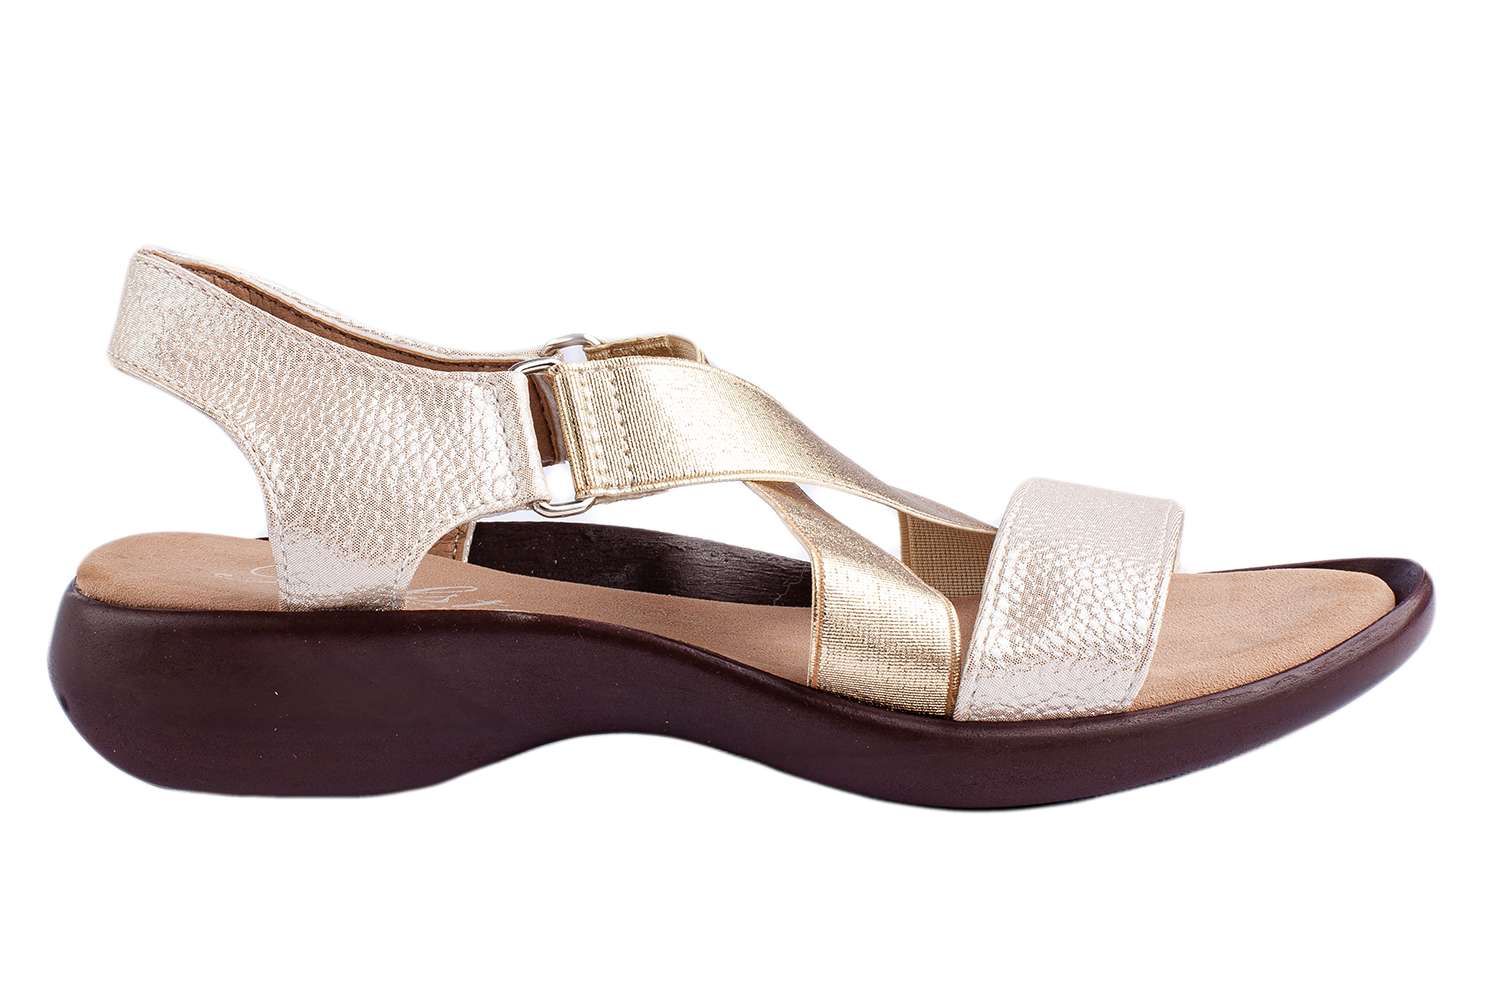 Women's sandals with an elastic by BELSTA - 3